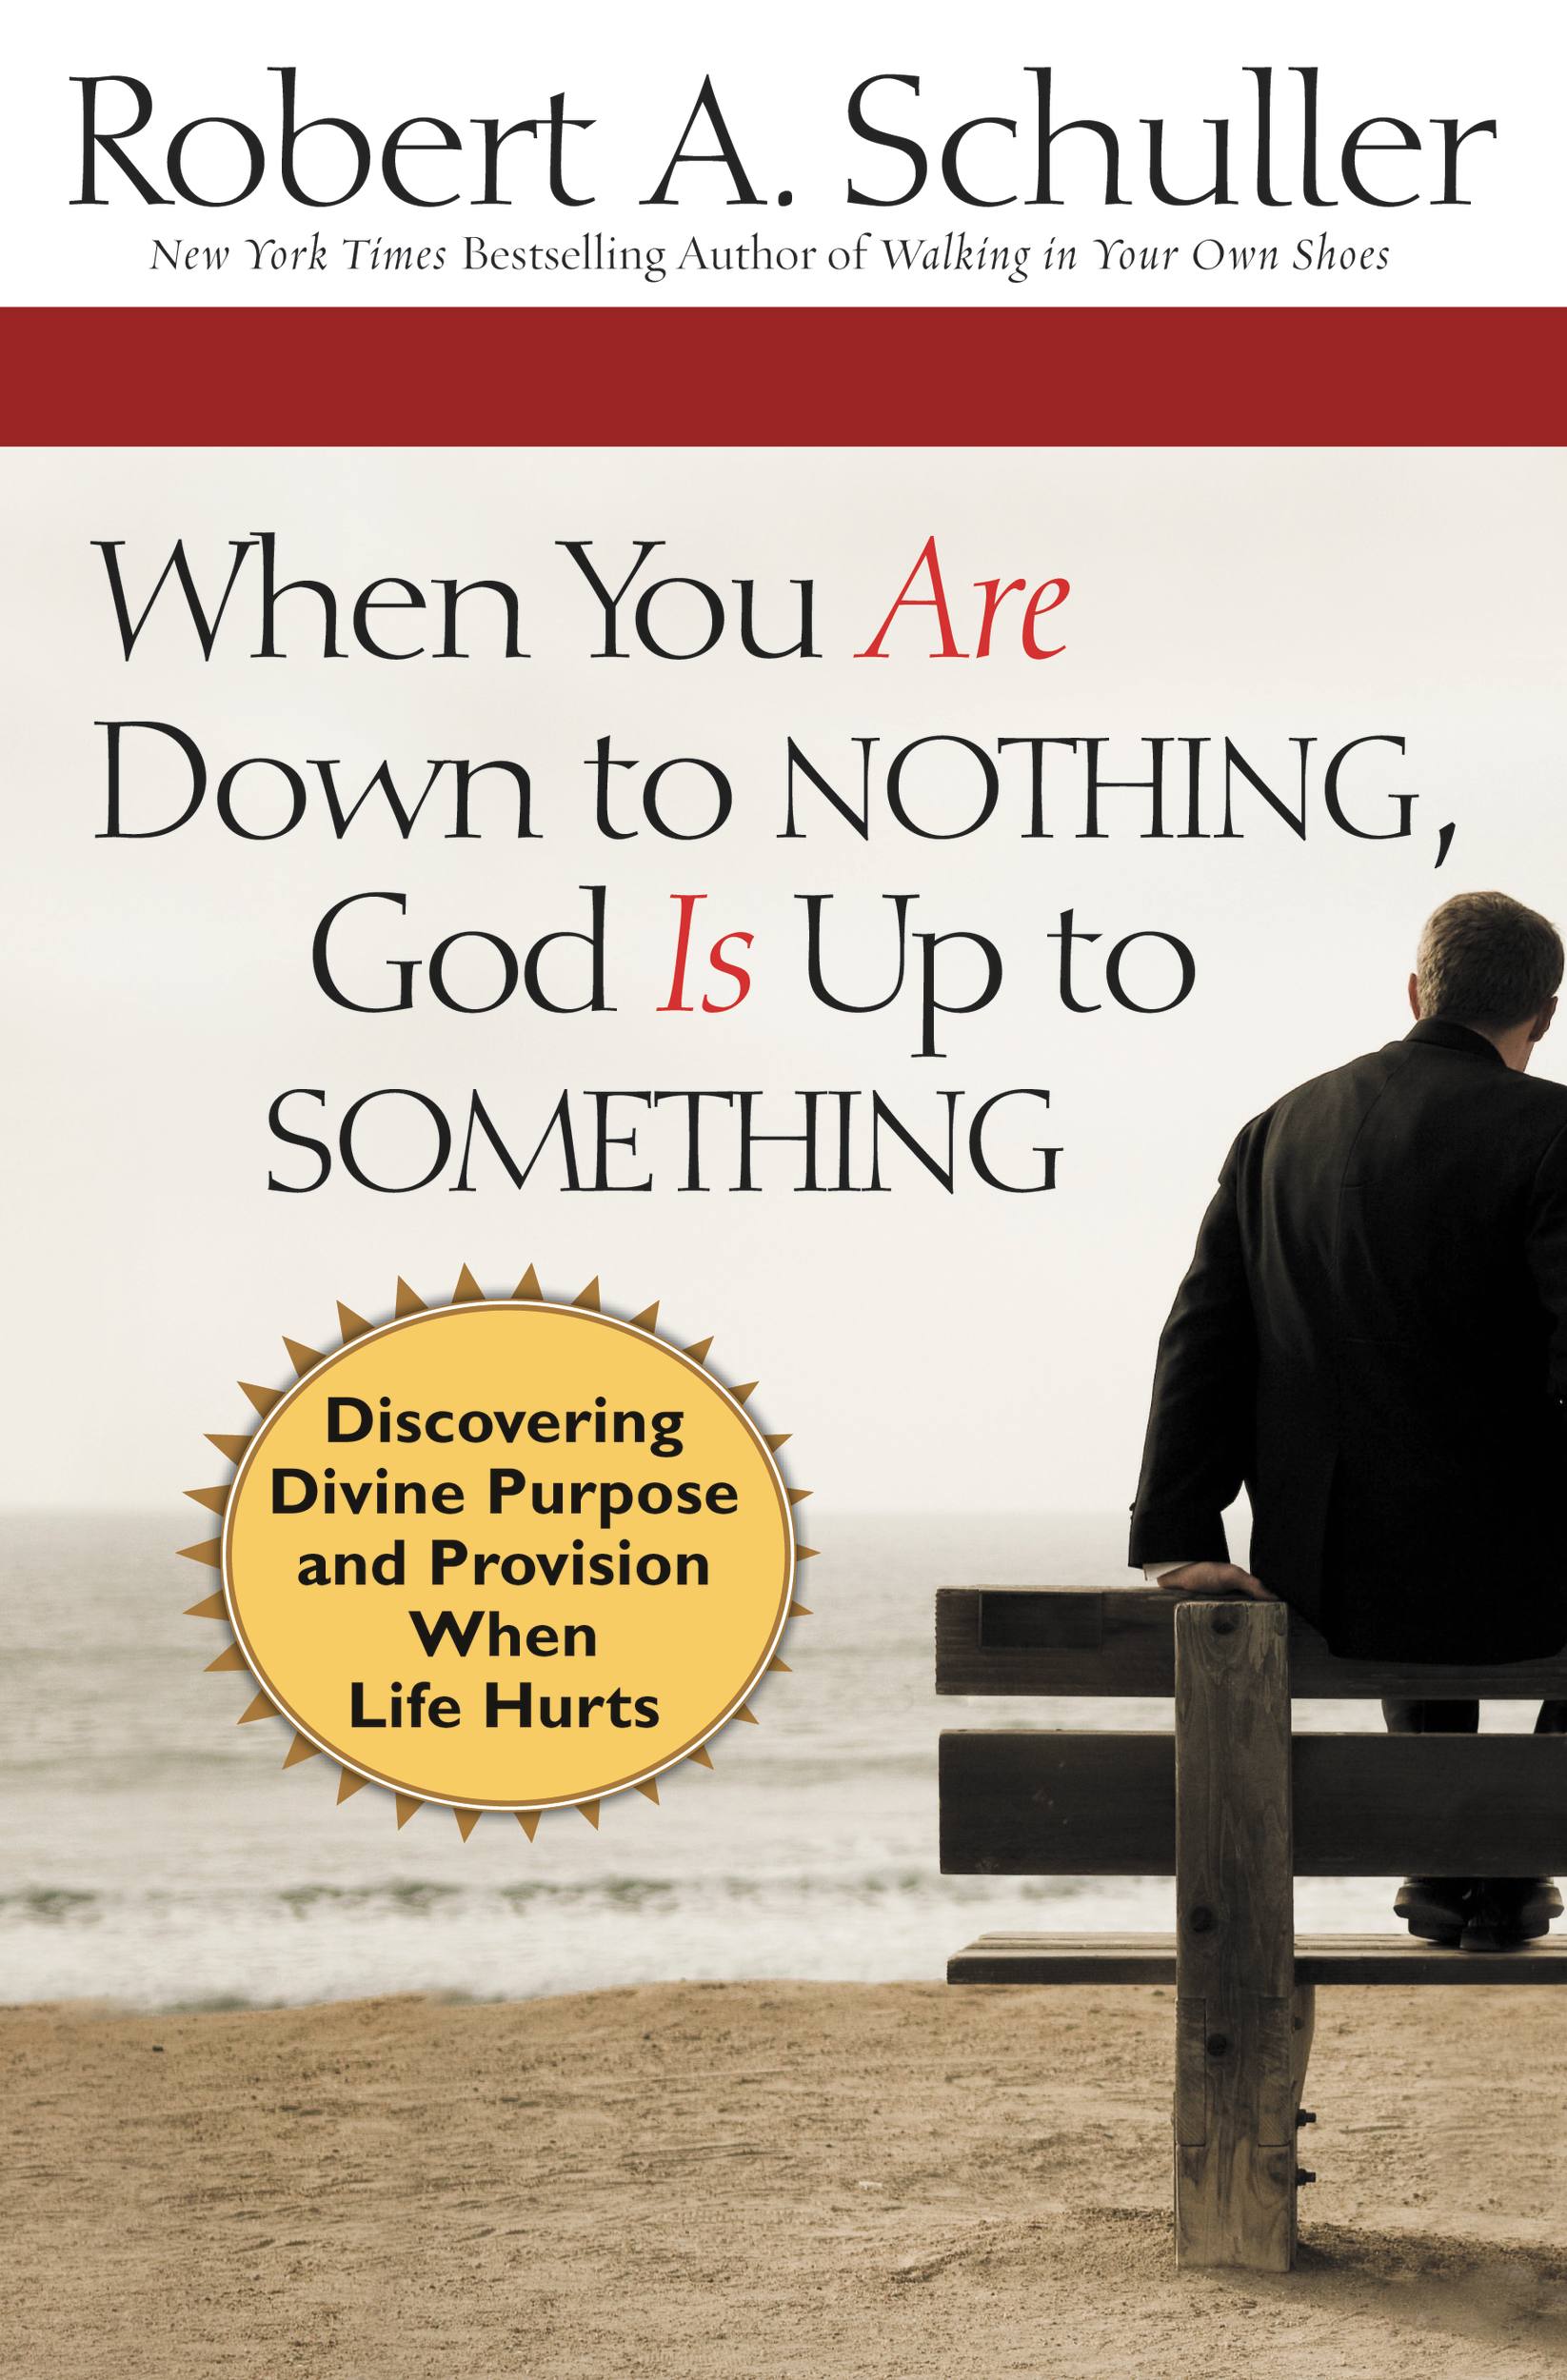 When You Are Down to Nothing, God Is Up to Something by Robert